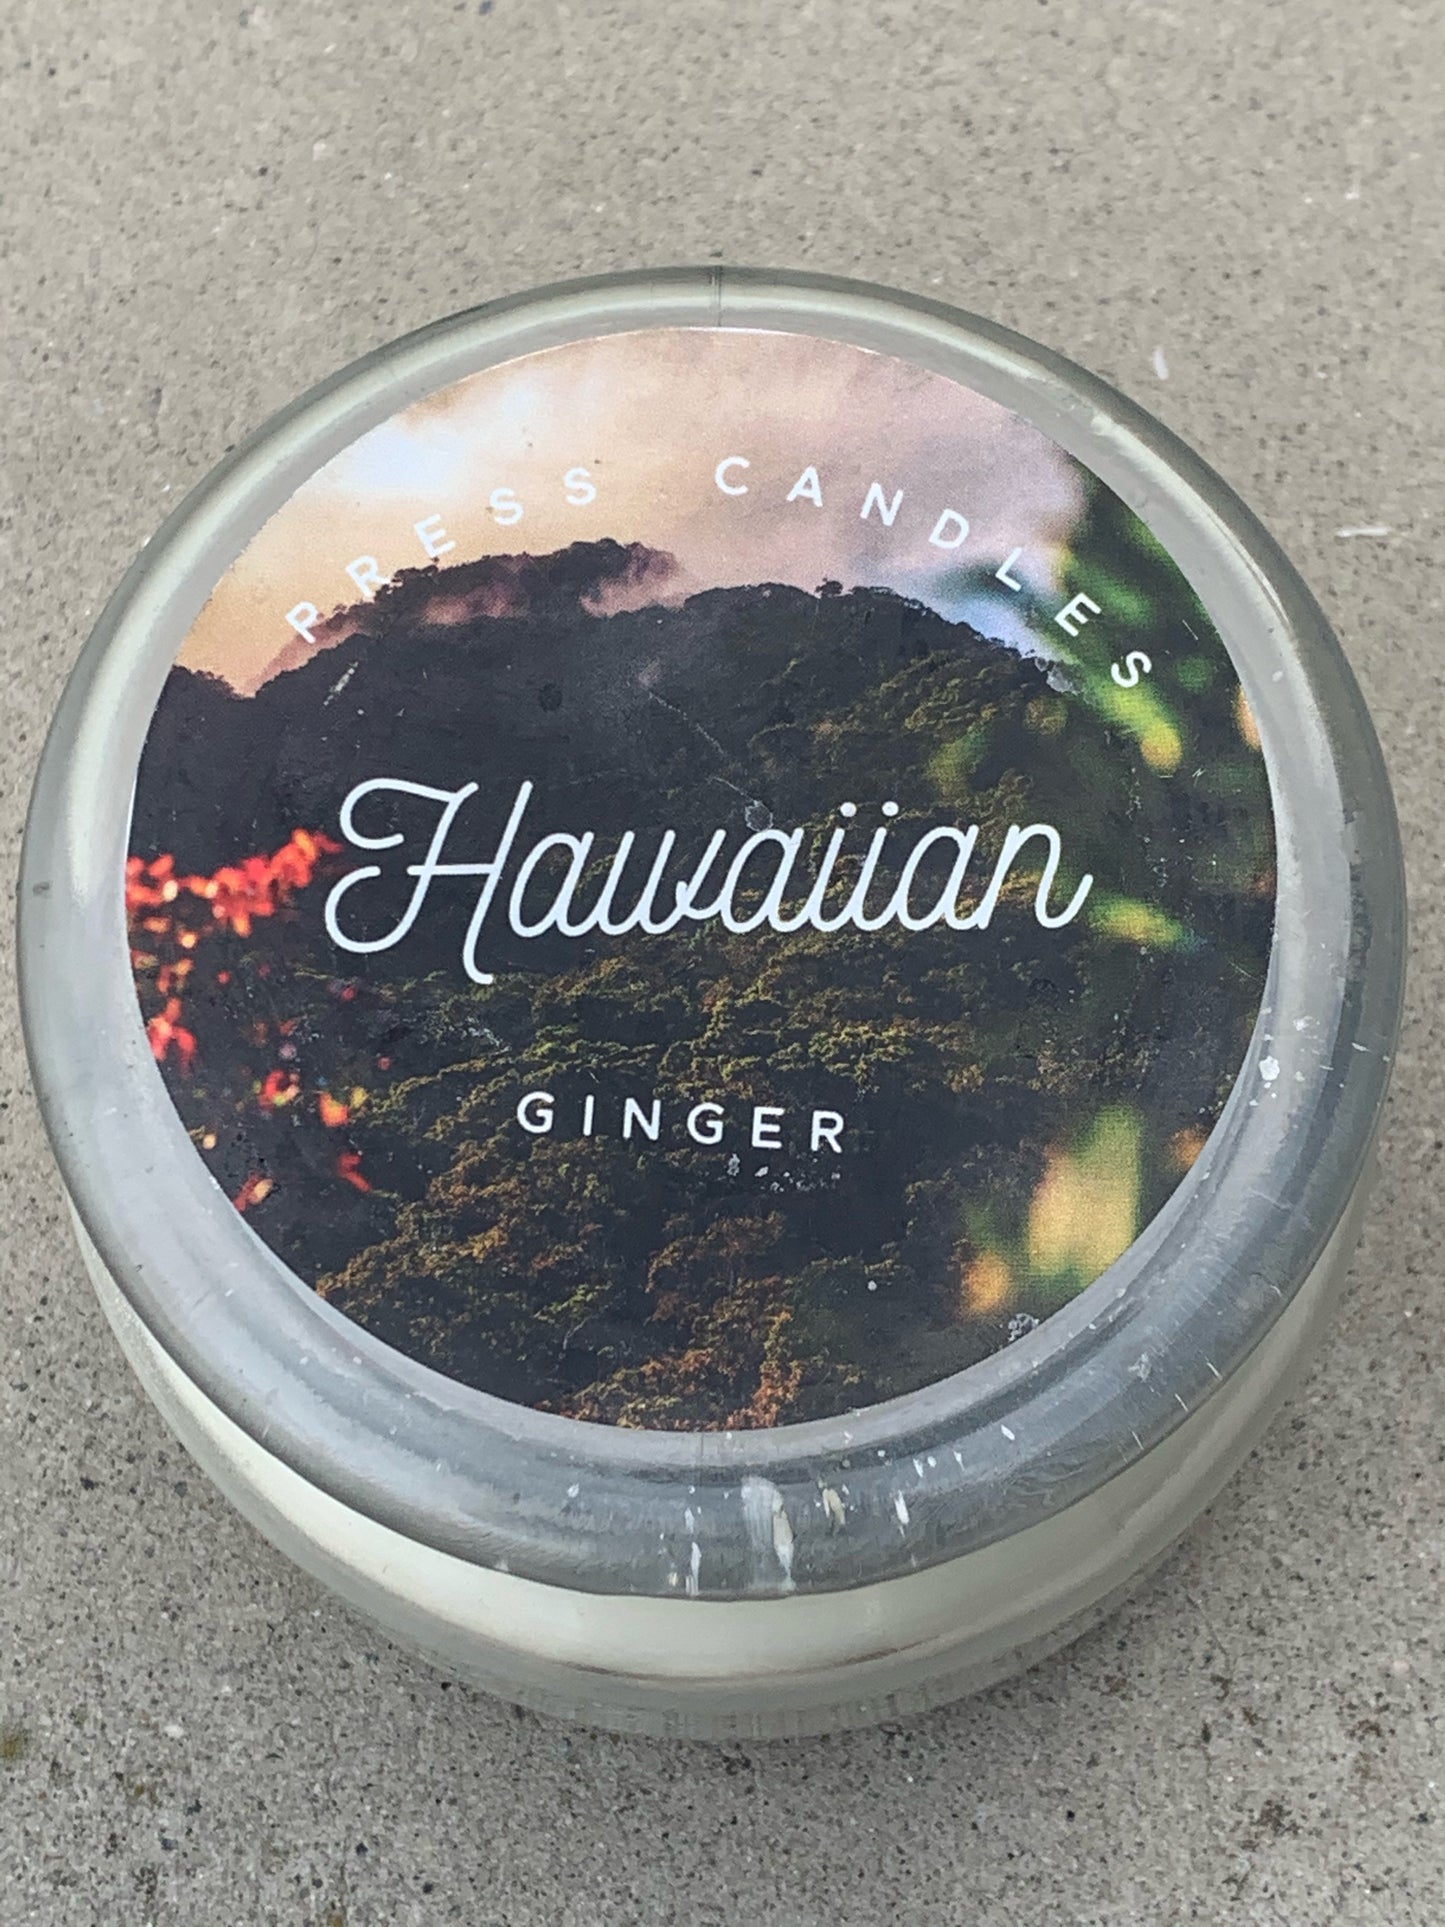 Old packaging Hawaiian white ginger